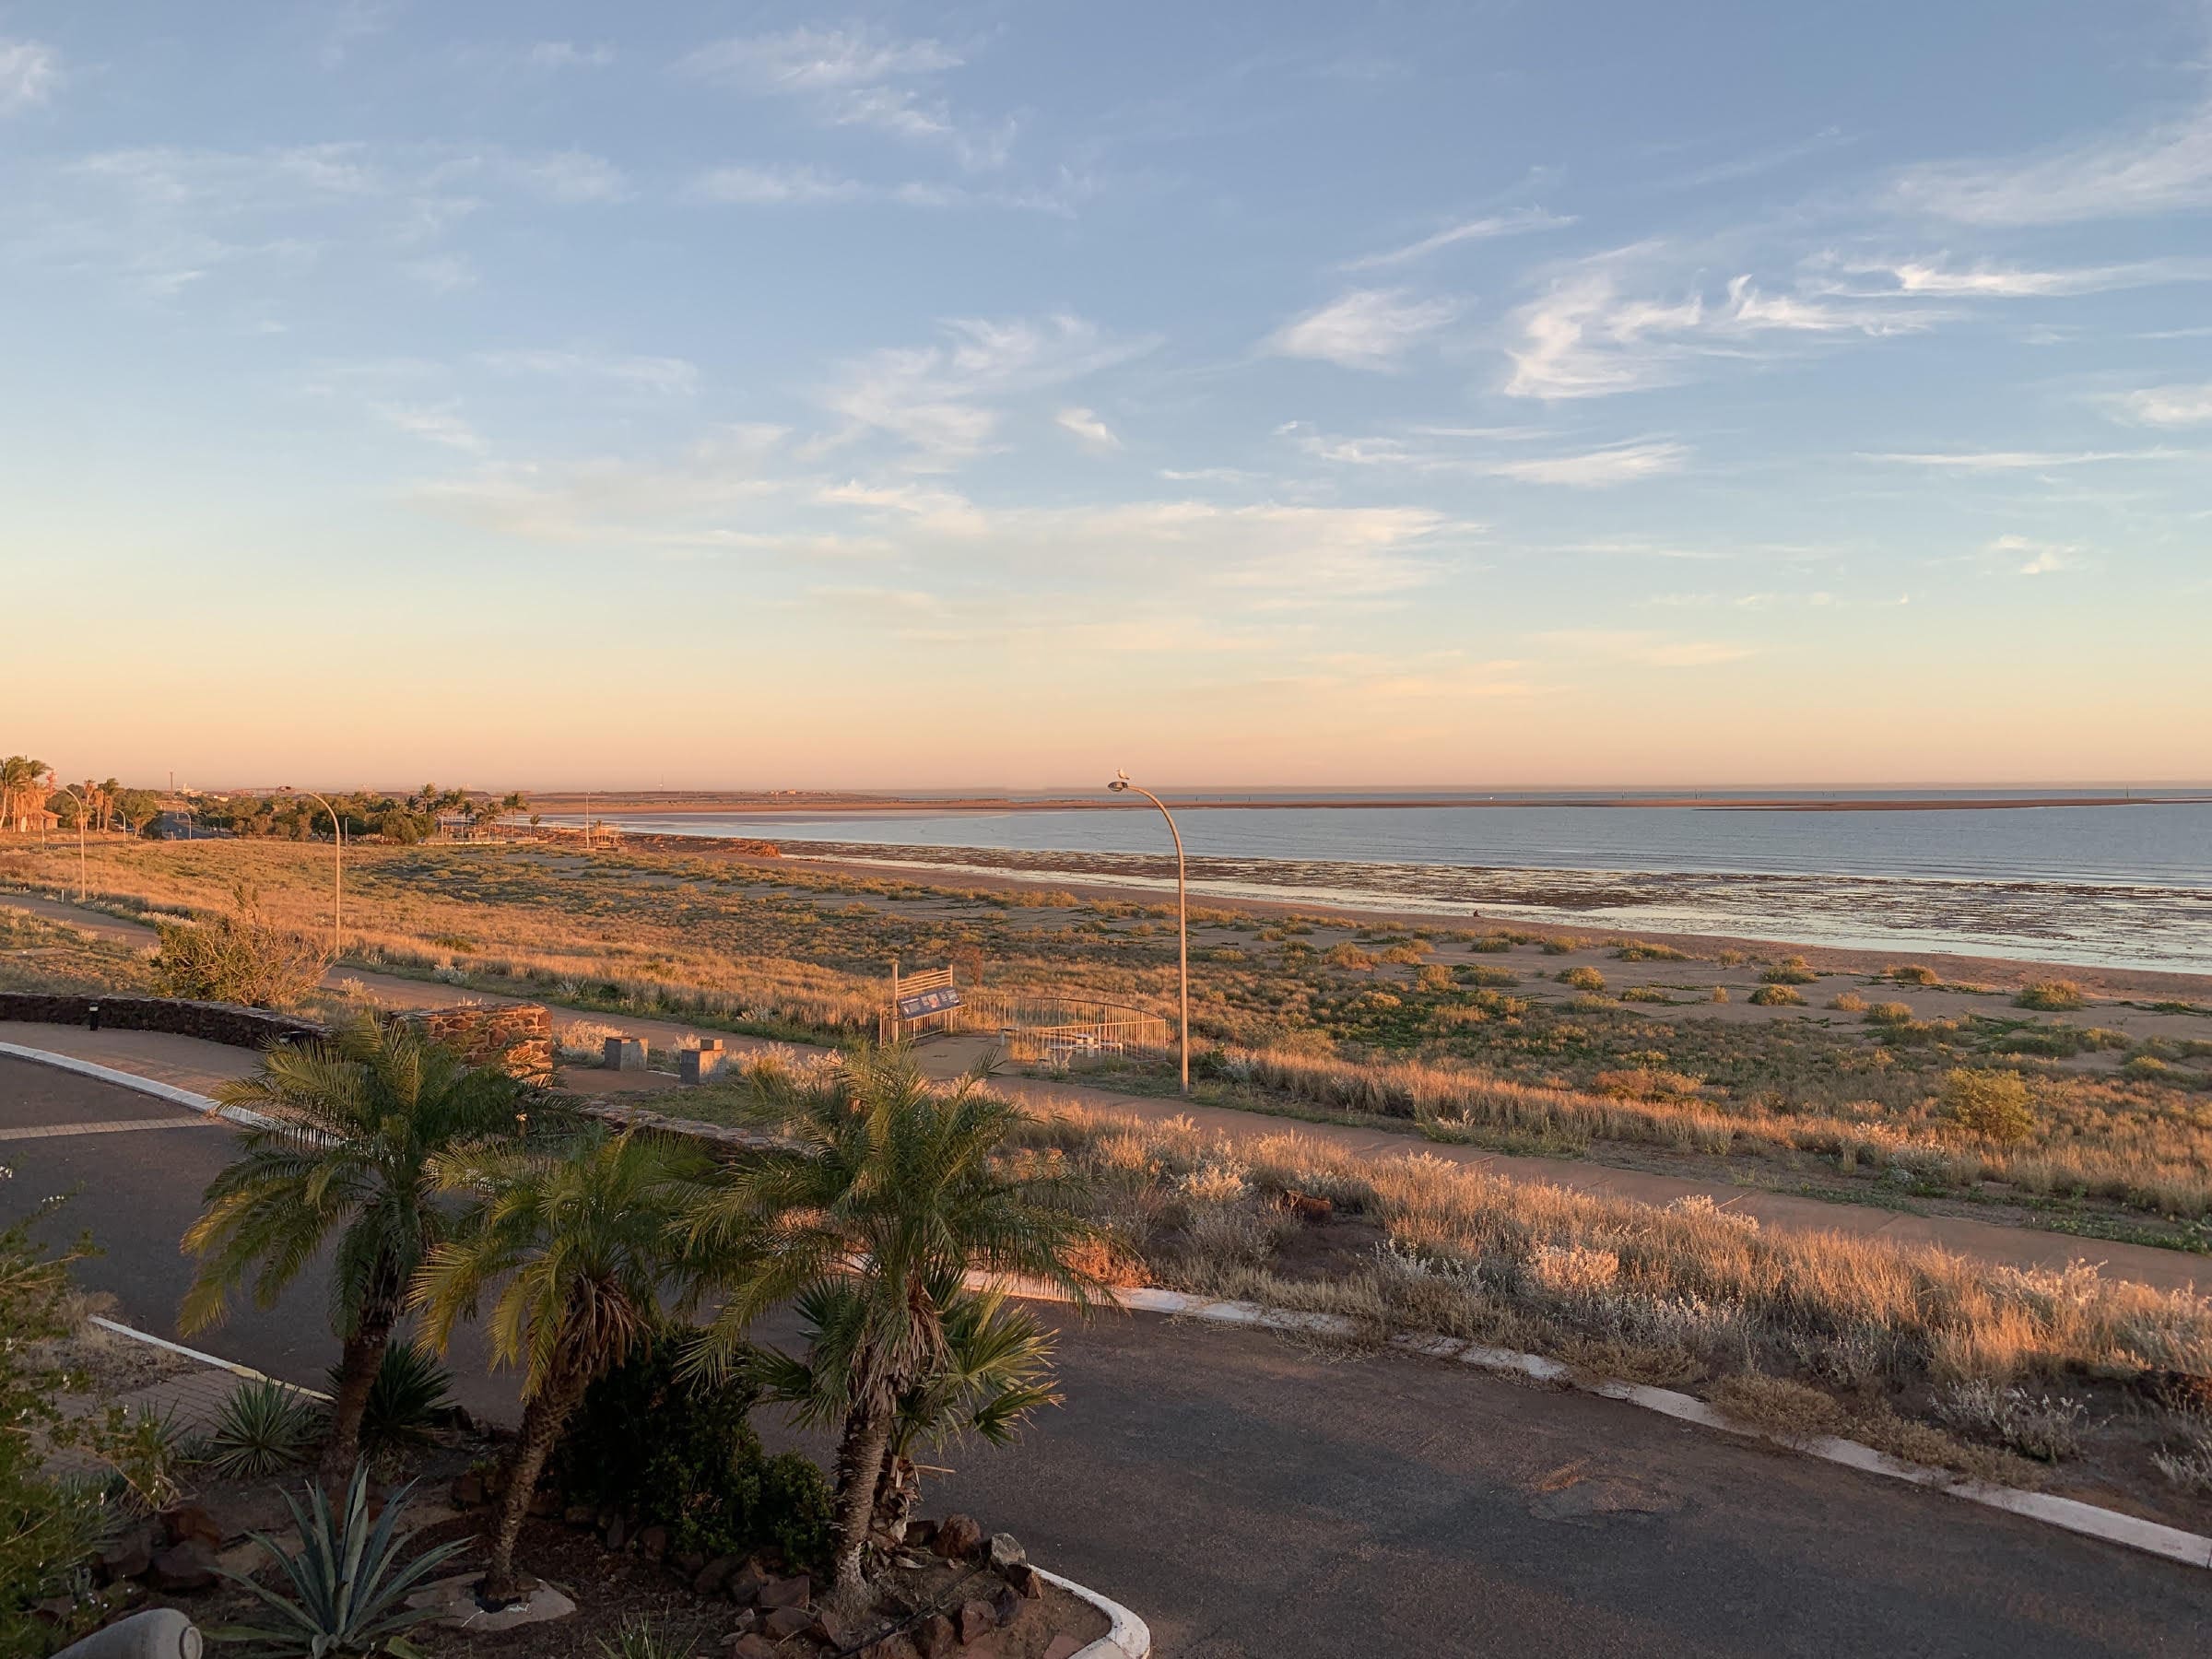 A view of the beach in Port Hedland at sunset.